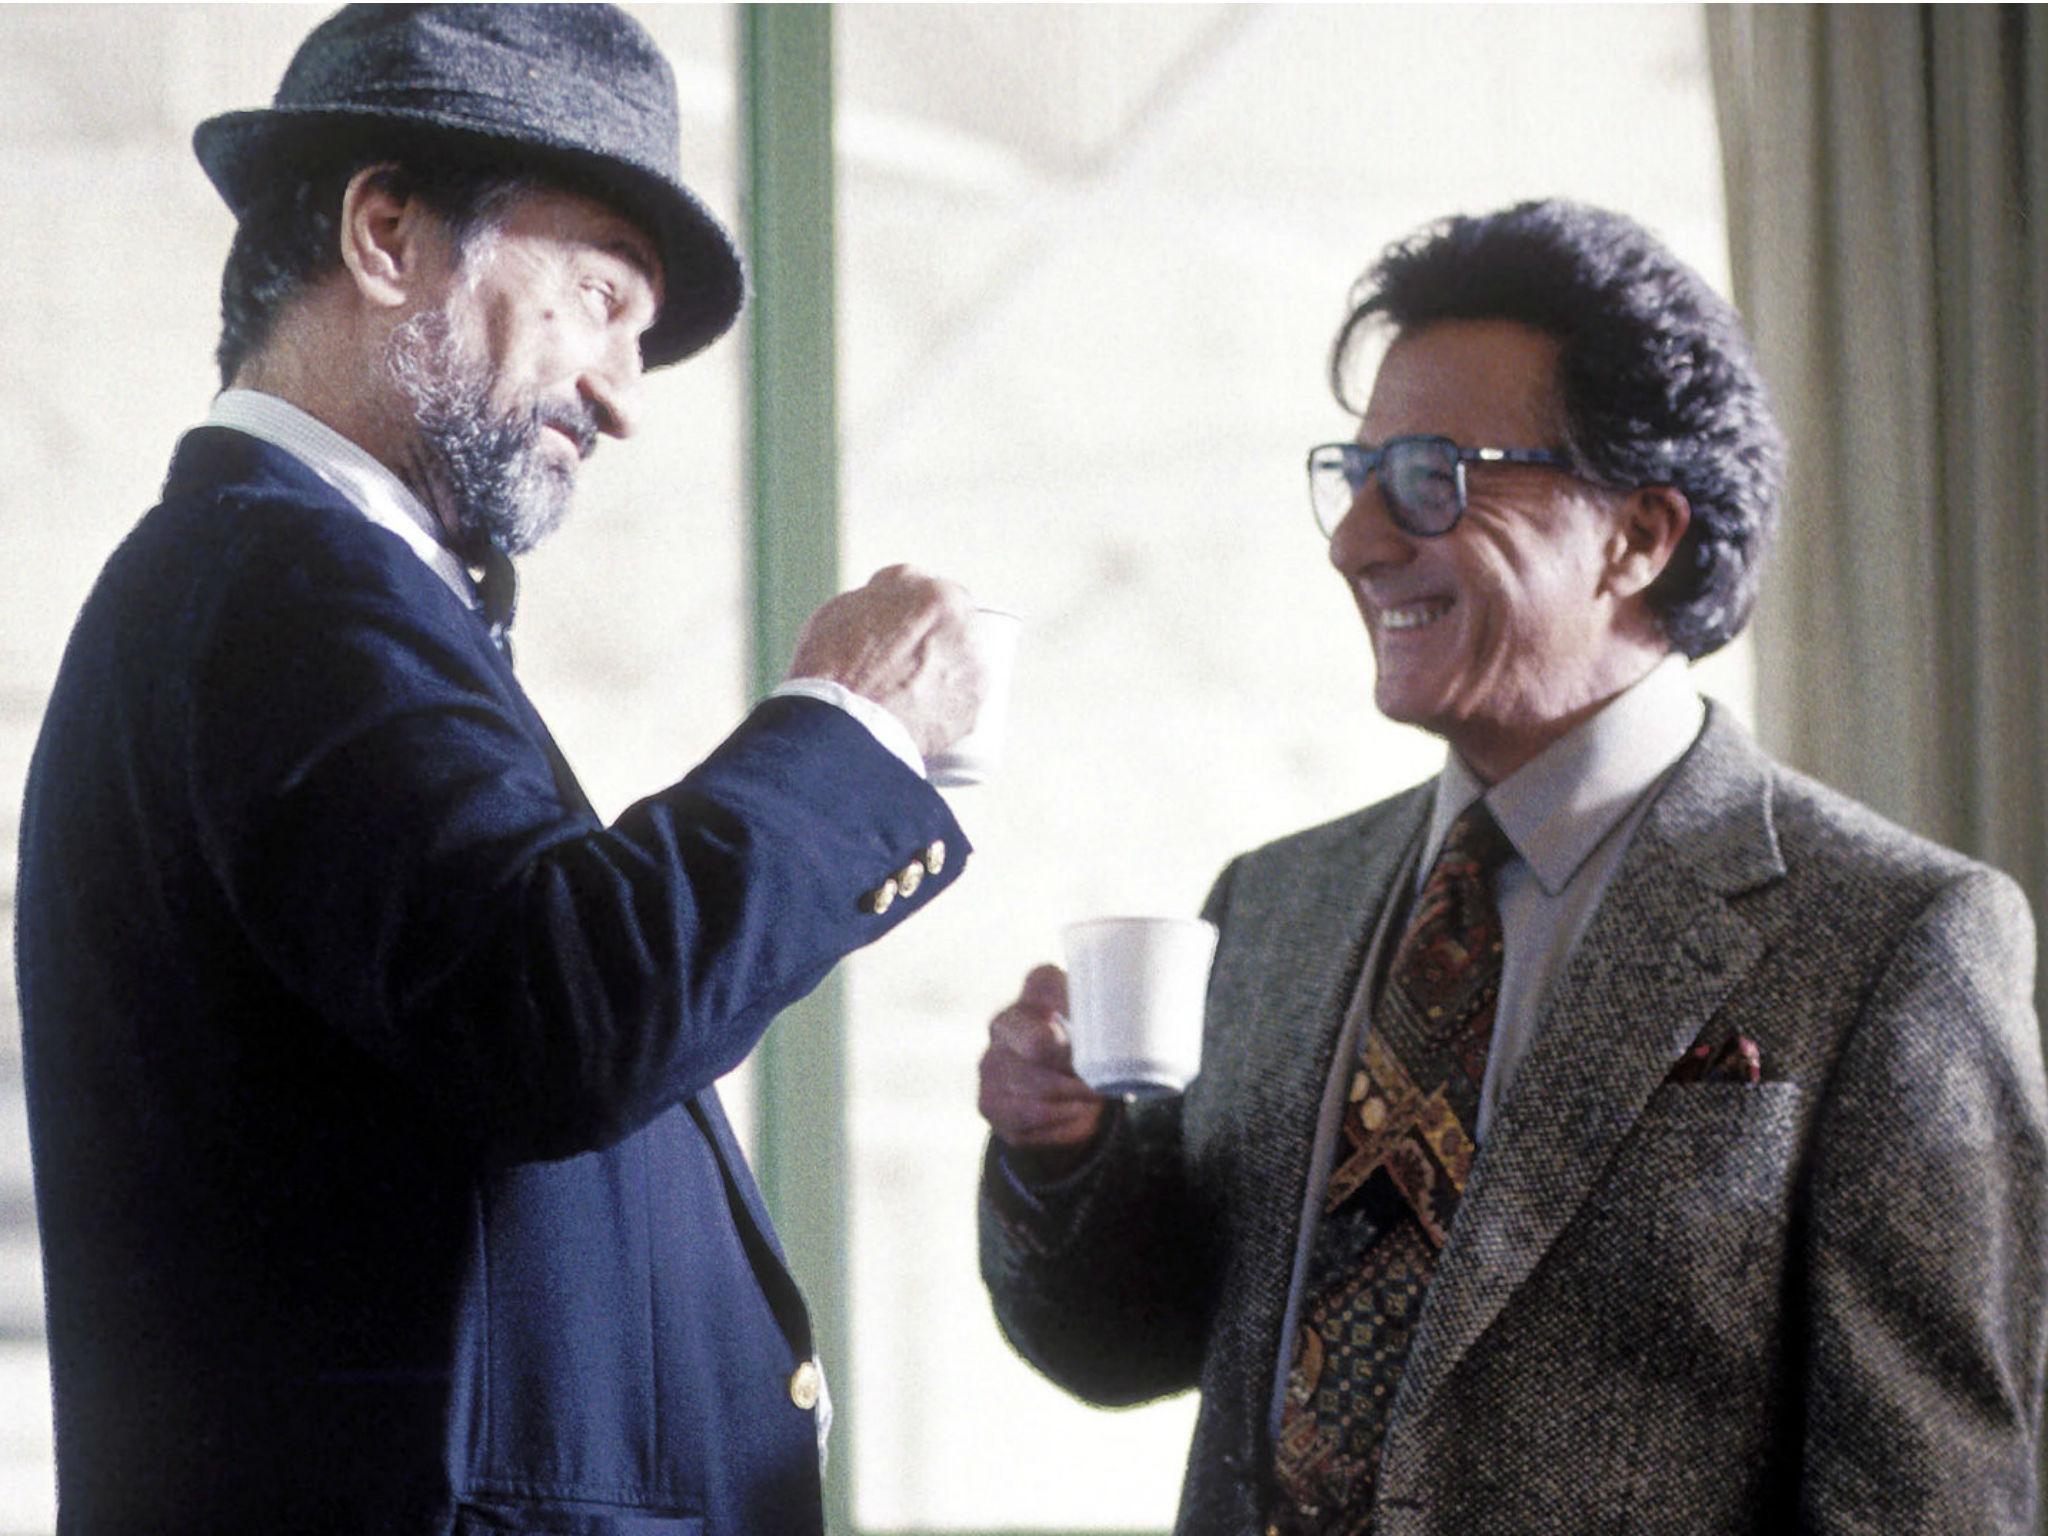 Robert De Niro as spin doctor Conrad Brean and Dustin Hoffman as Hollywood producer Stanley Motss in 'Wag the Dog'